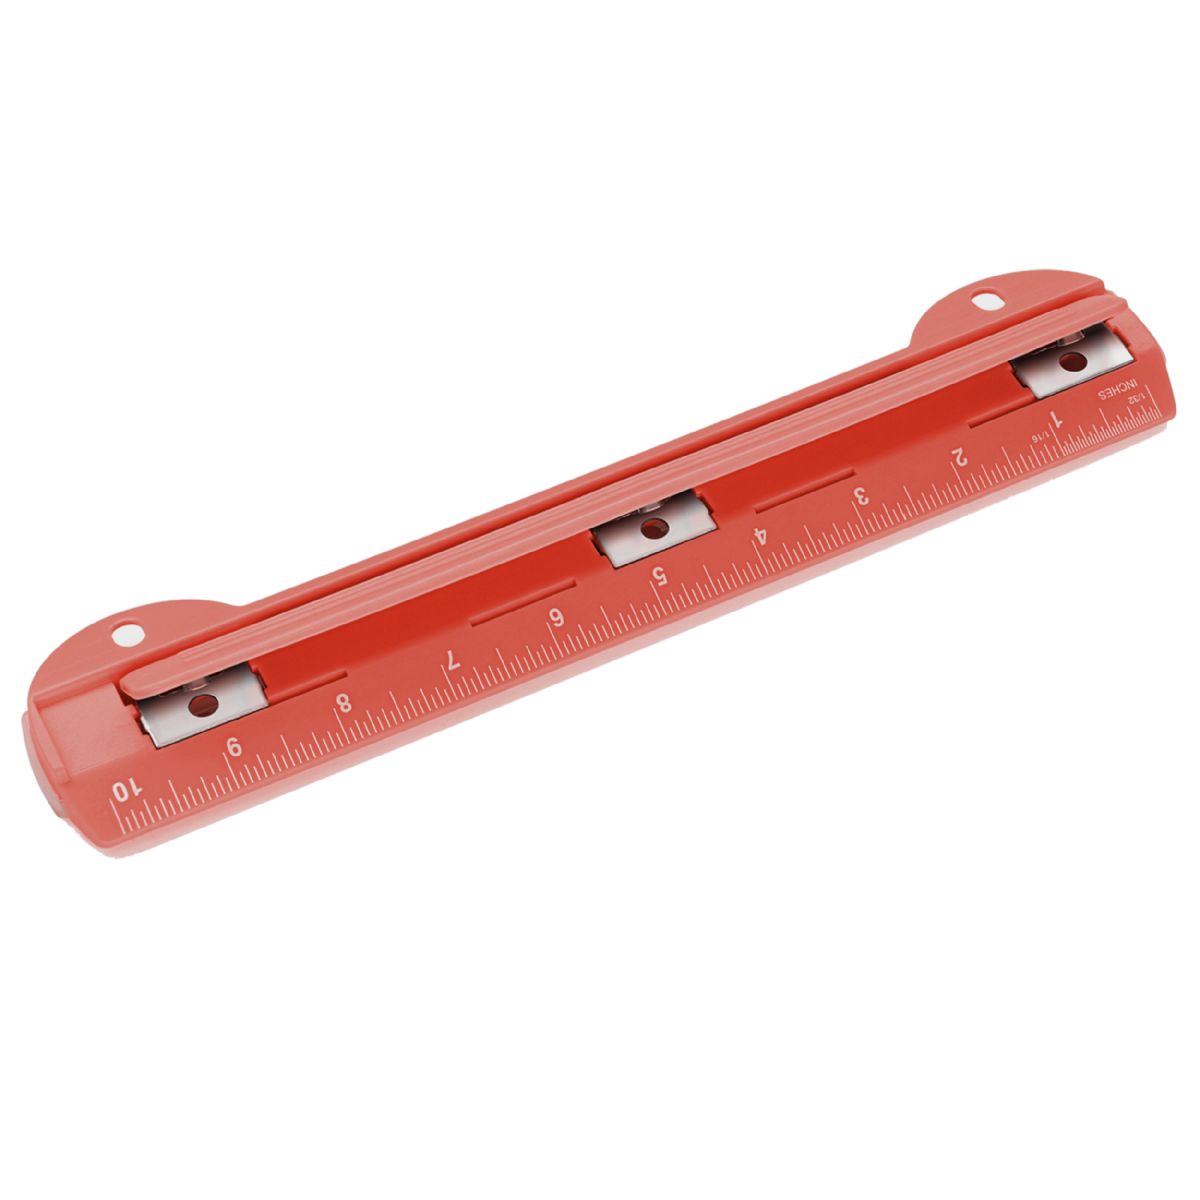 48 Pieces Portable 3-Hole Paper Punch Red - Hole Punchers